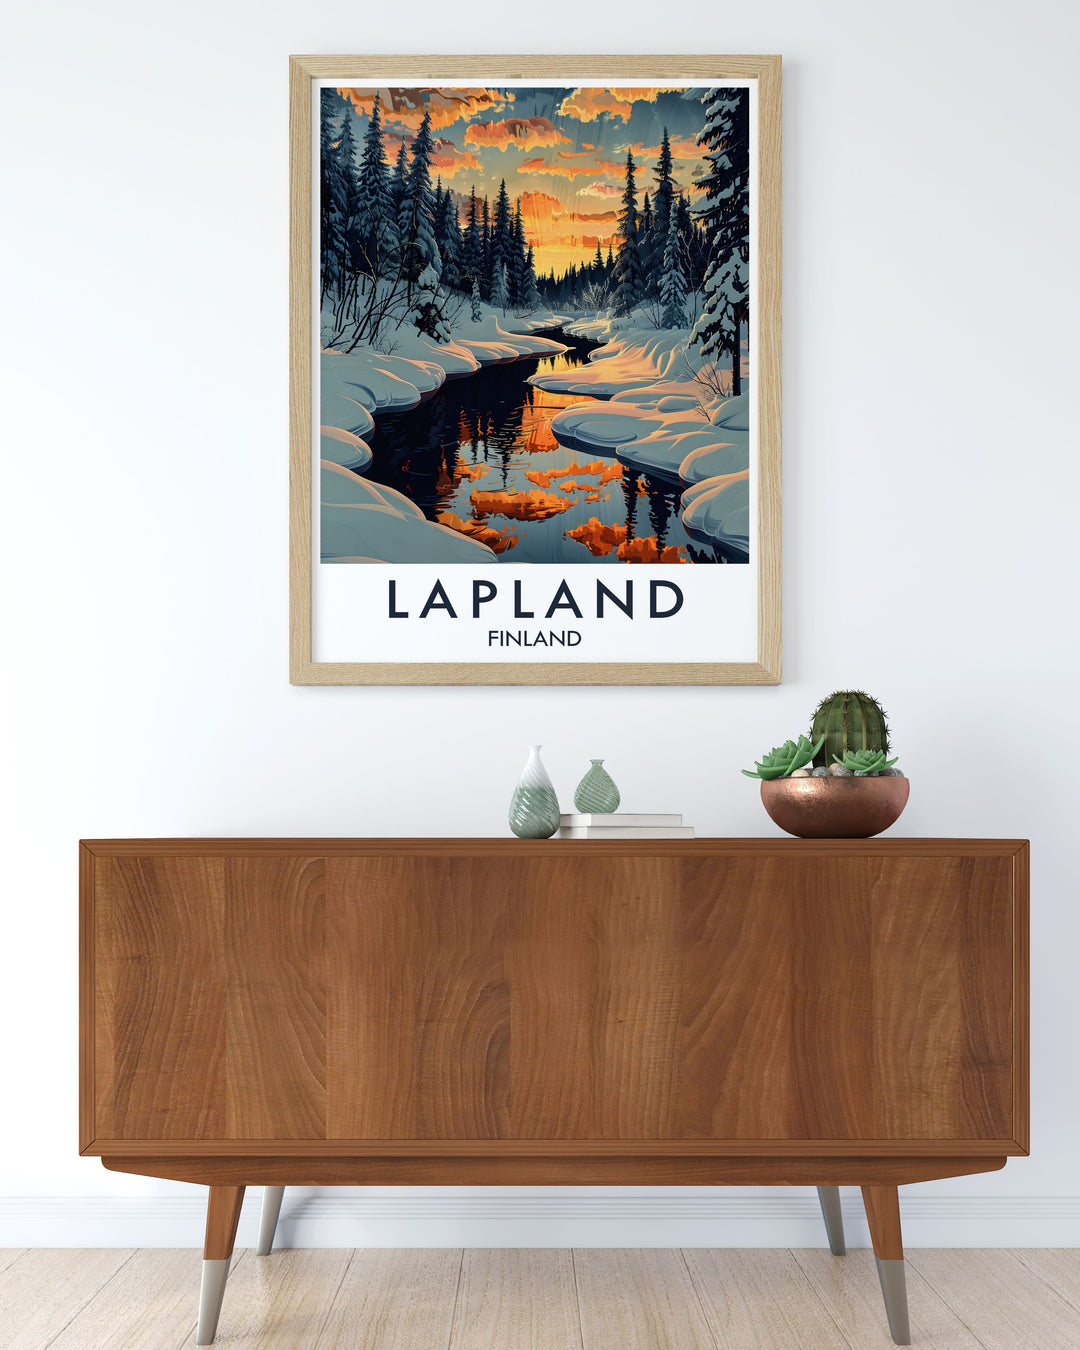 Arctic Wilderness Wall Art presenting the breathtaking landscapes of Finland and Lapland perfect for bringing the magic of the Arctic regions into your home or as a unique travel gift for loved ones.